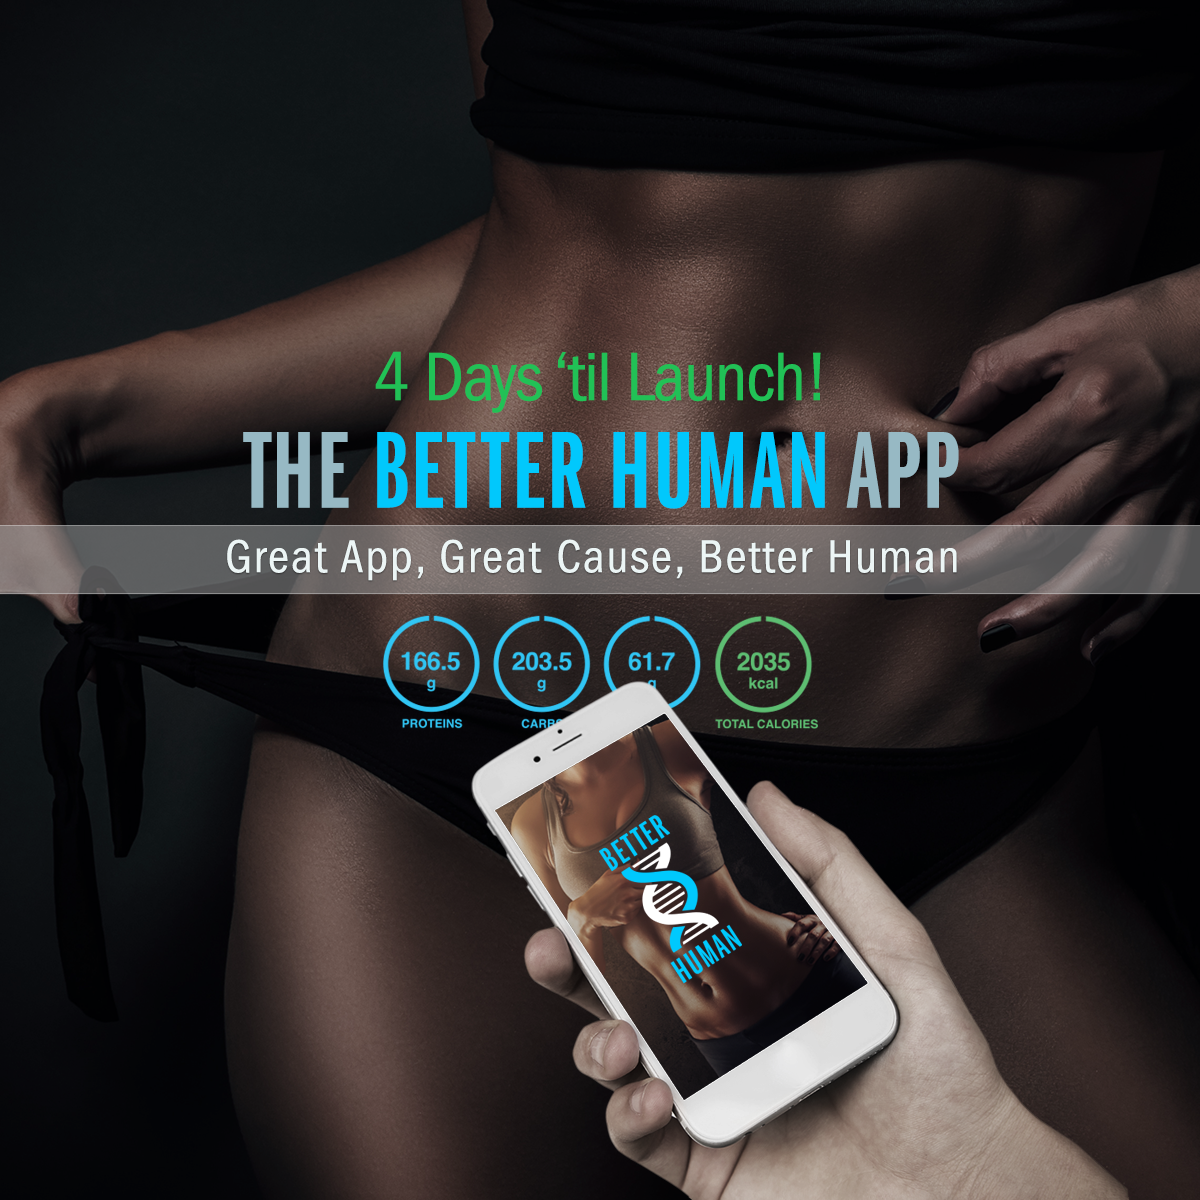 The Better Human App Social Media Launch Campaign